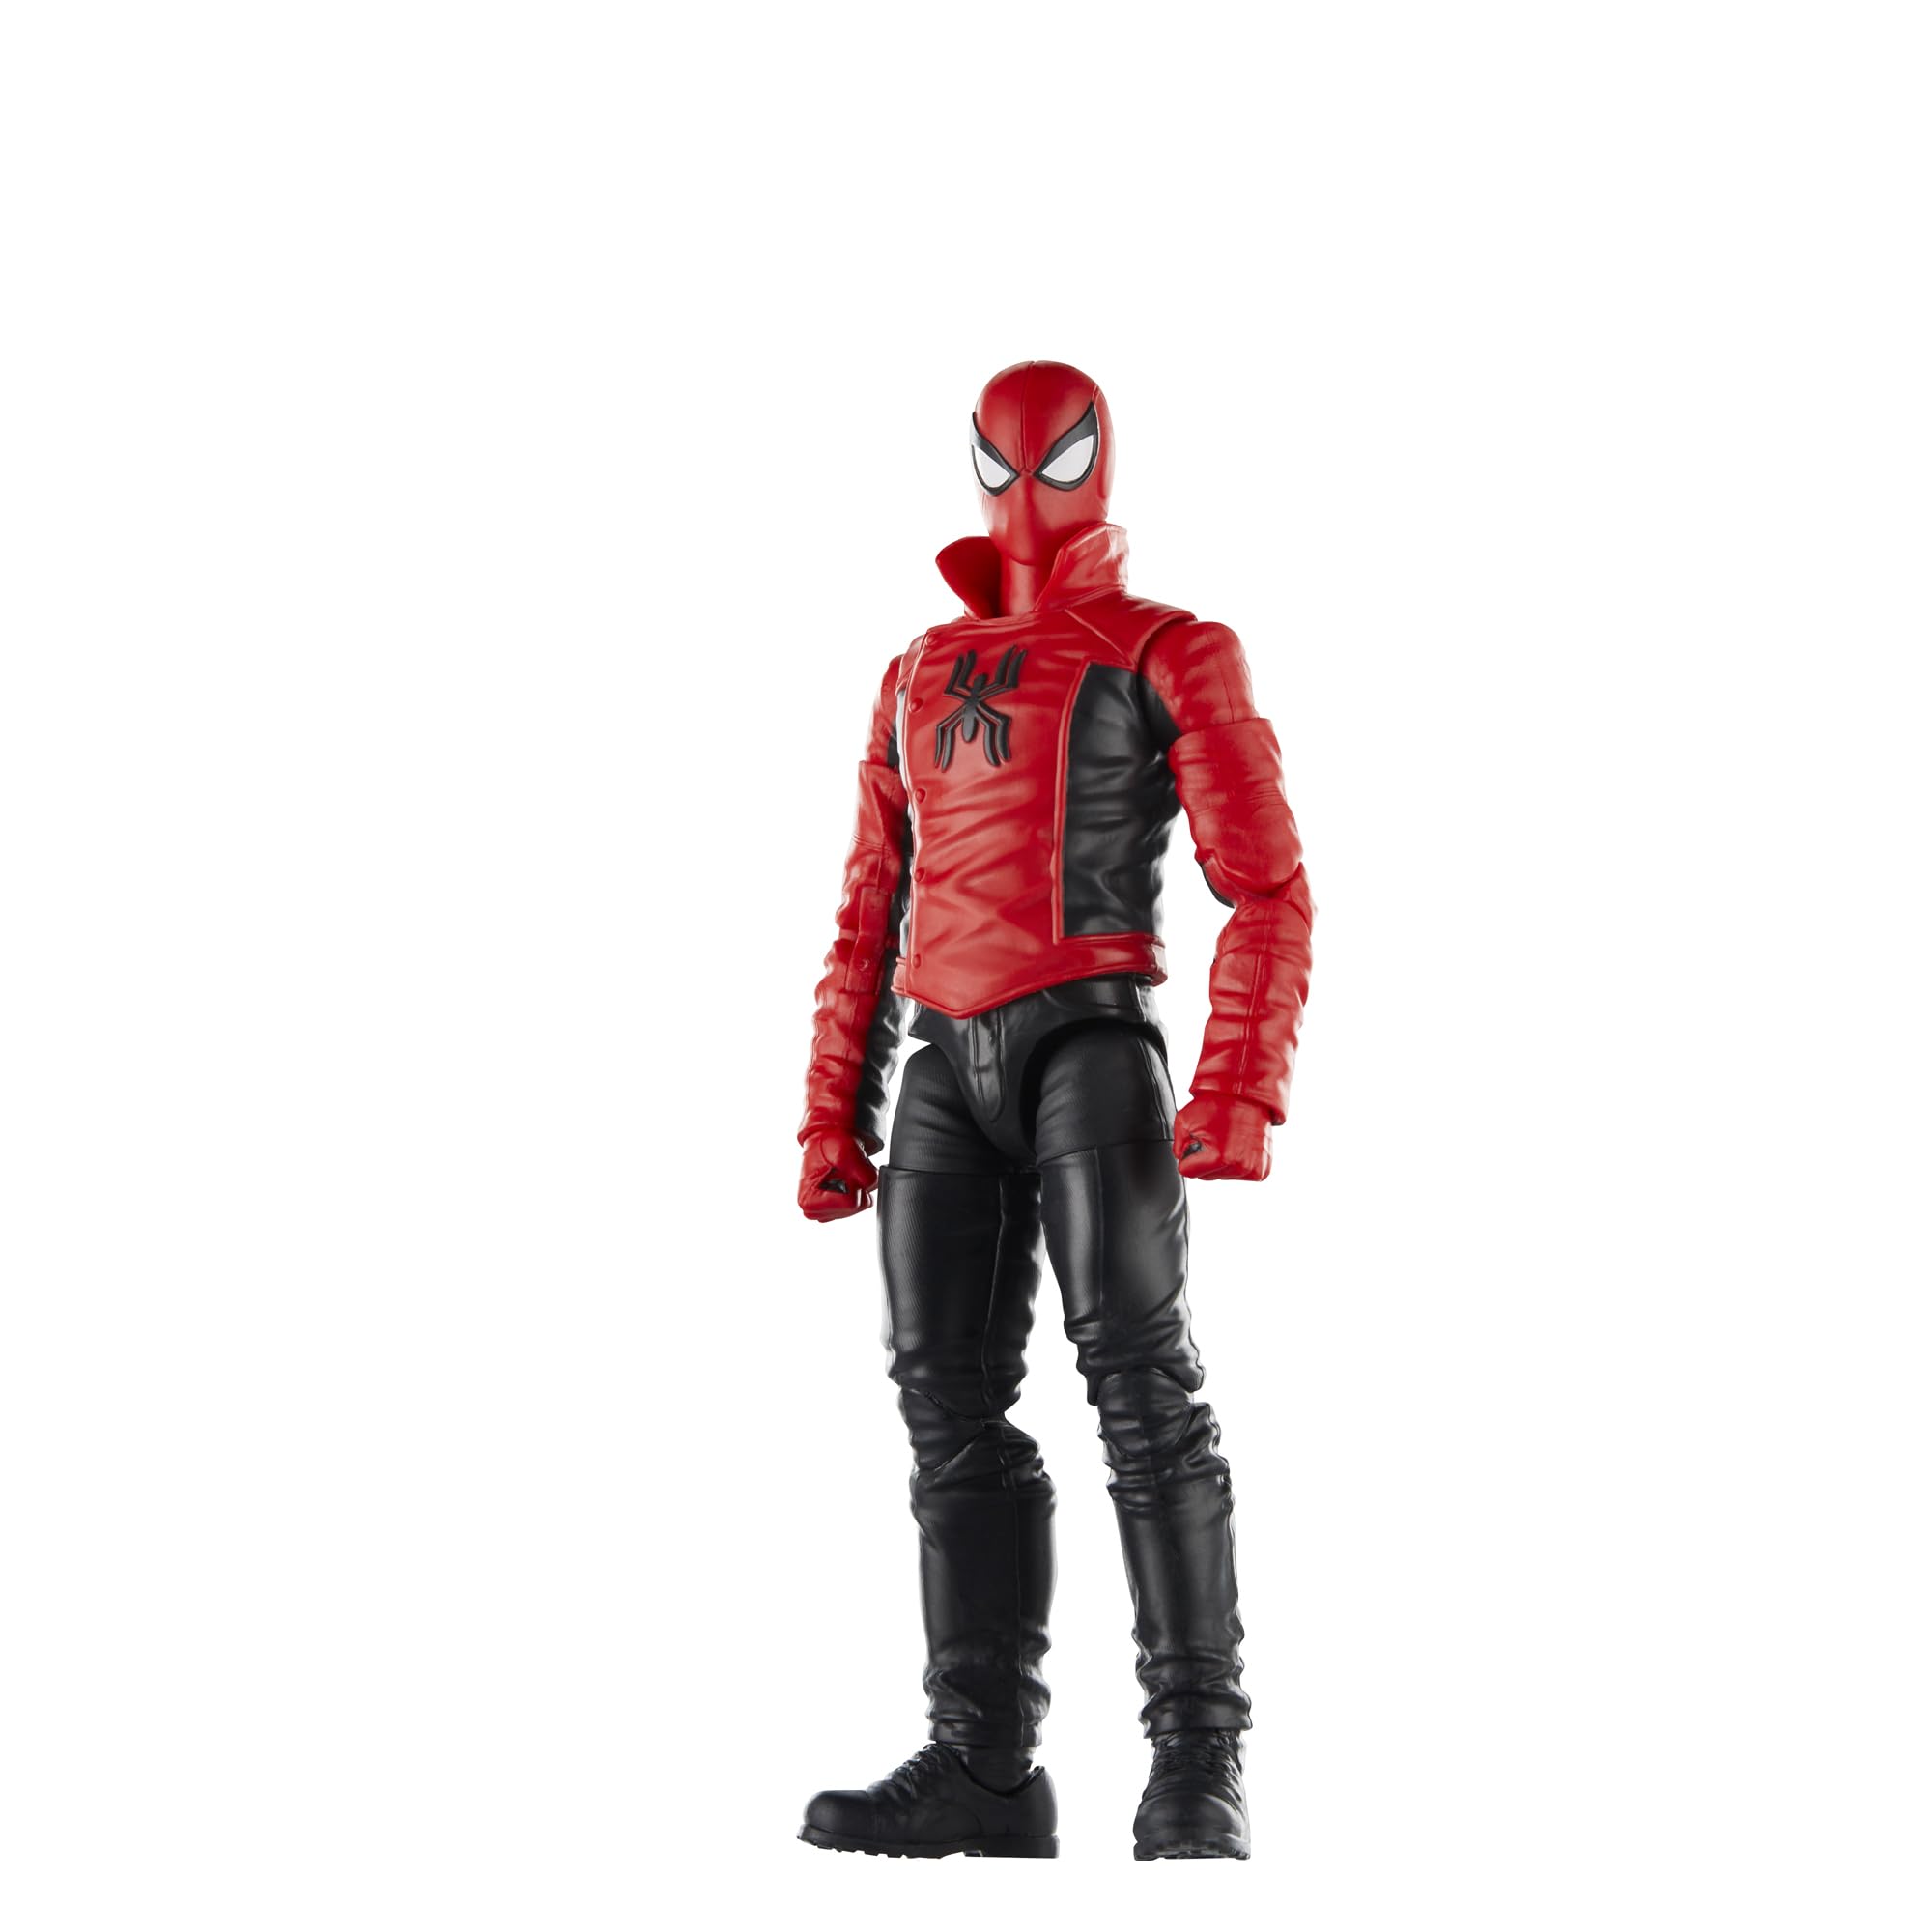 Marvel Legends Series Last Stand Spider-Man, Comics Collectible 6-Inch Action Figure